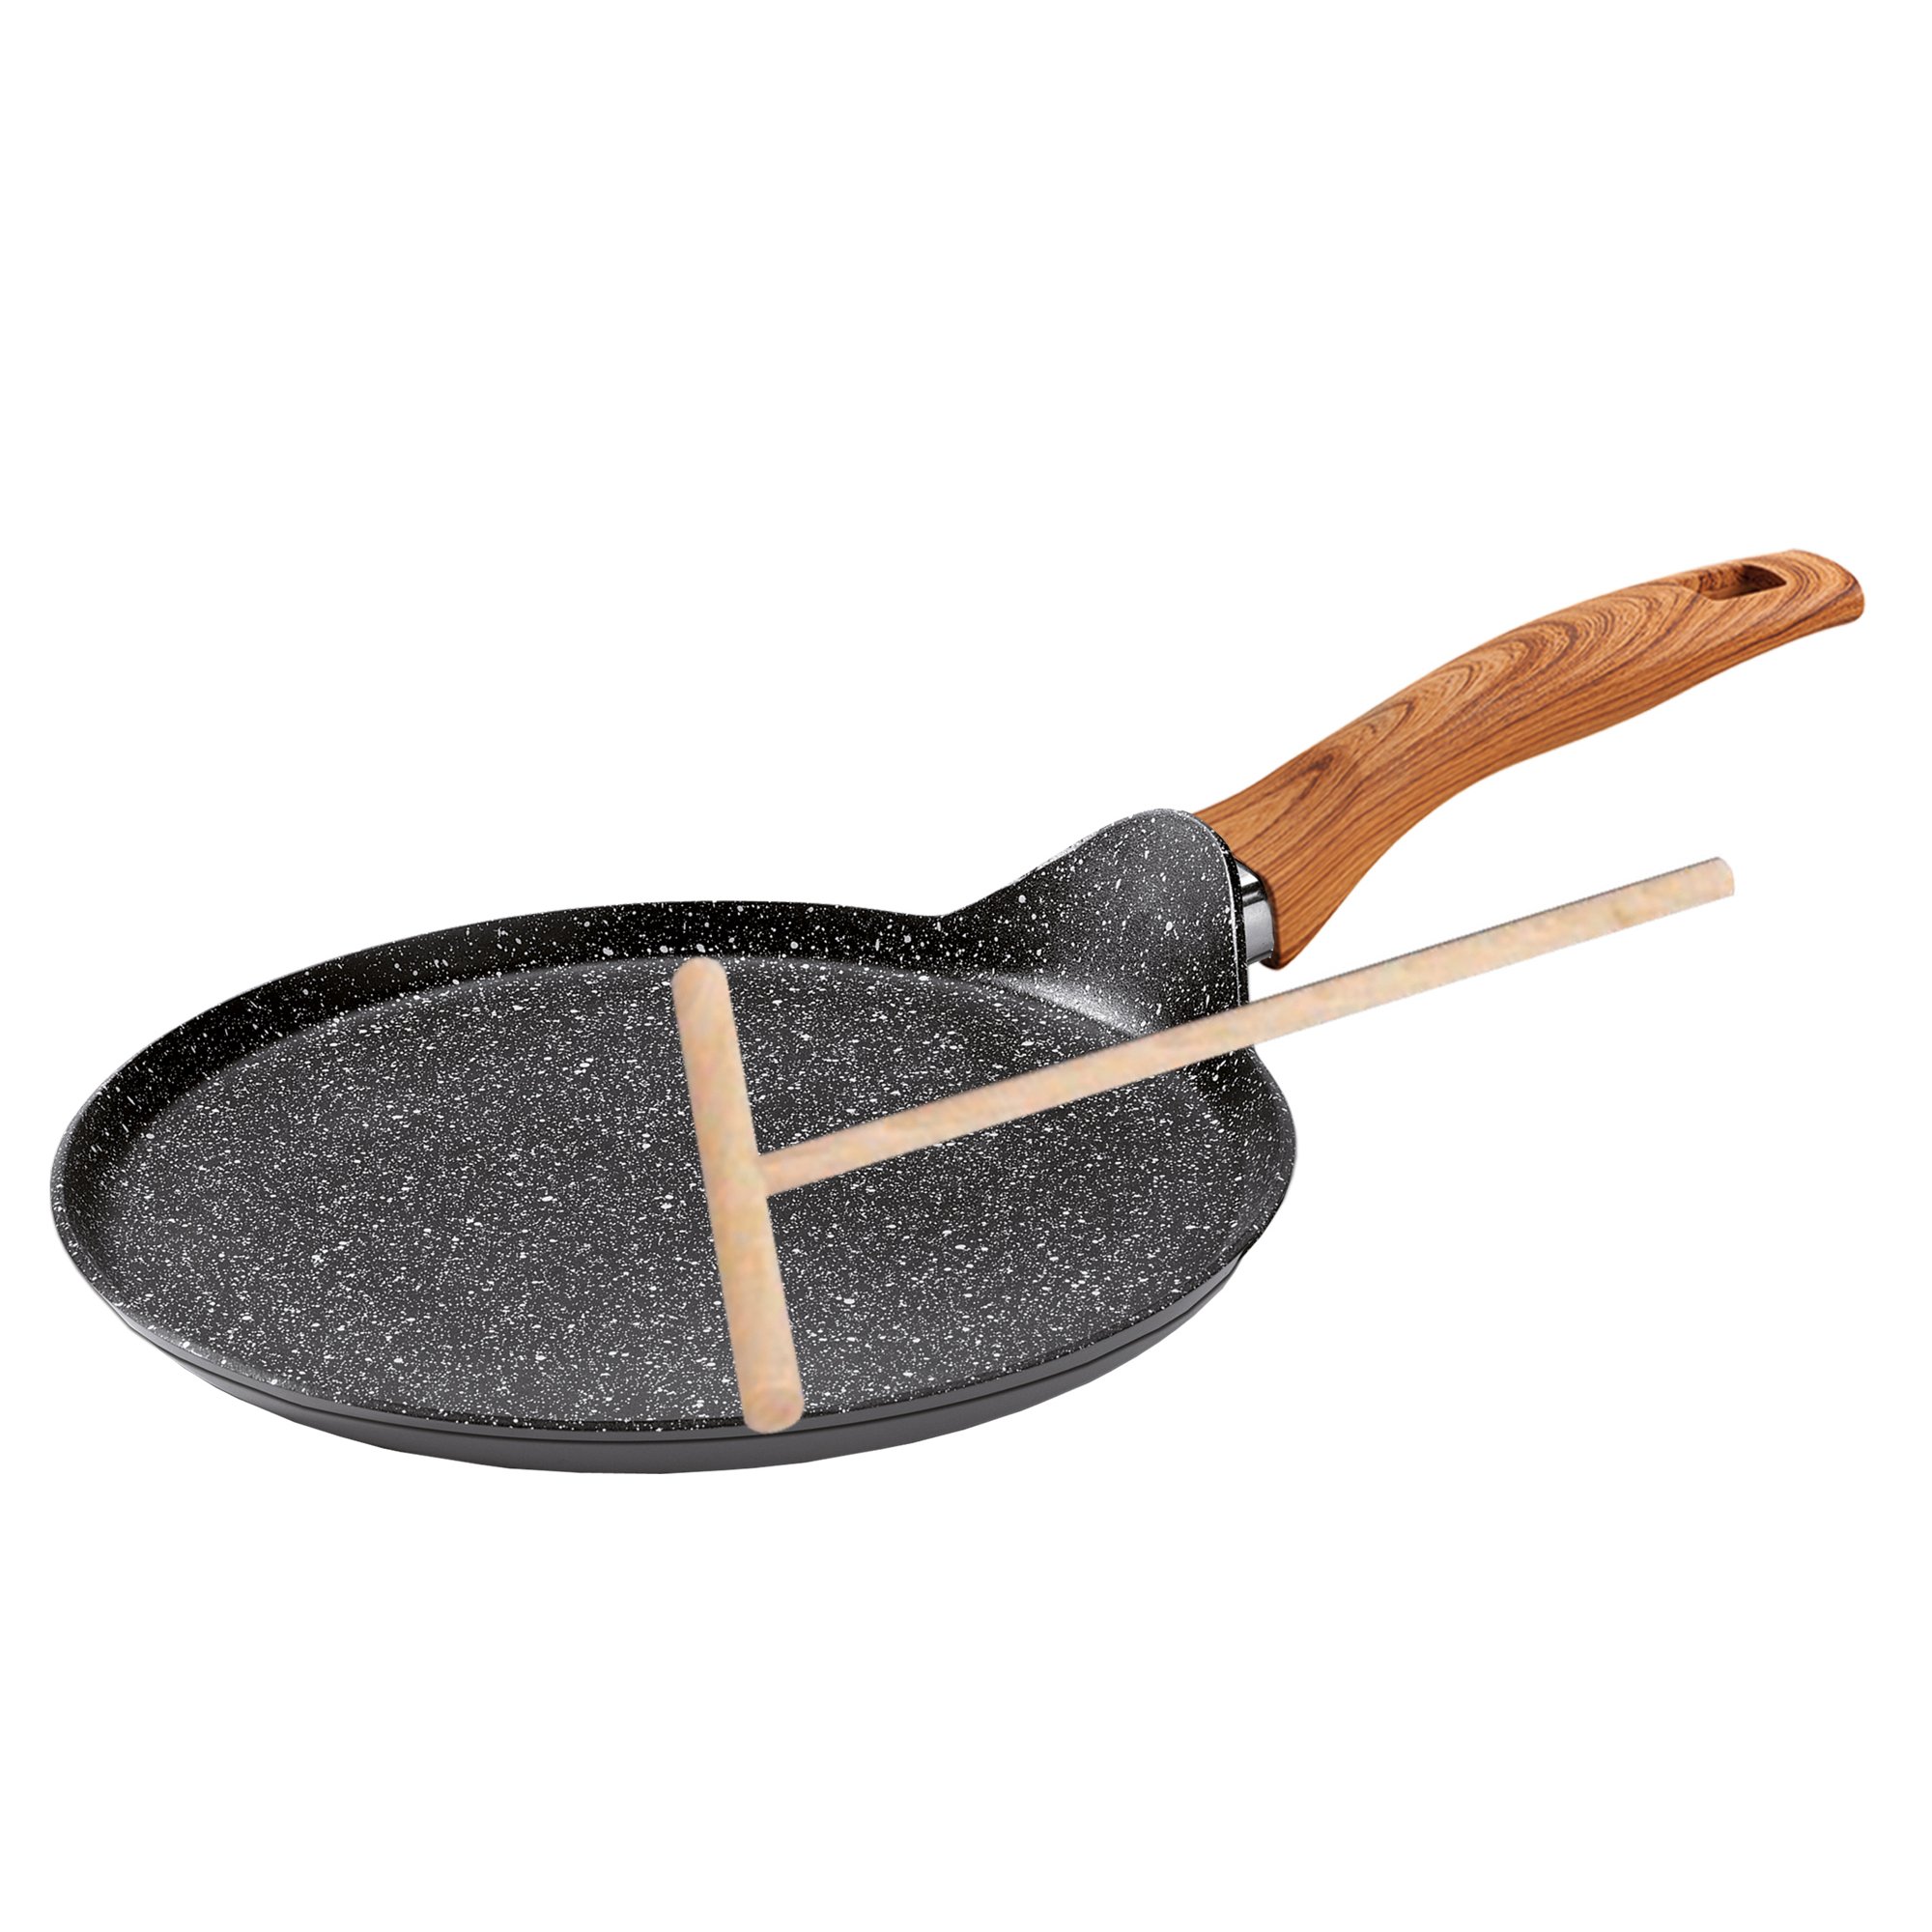 STONELINE® Back to Nature Crêpes Pan 25 cm, with batter spreader, suitable for induction